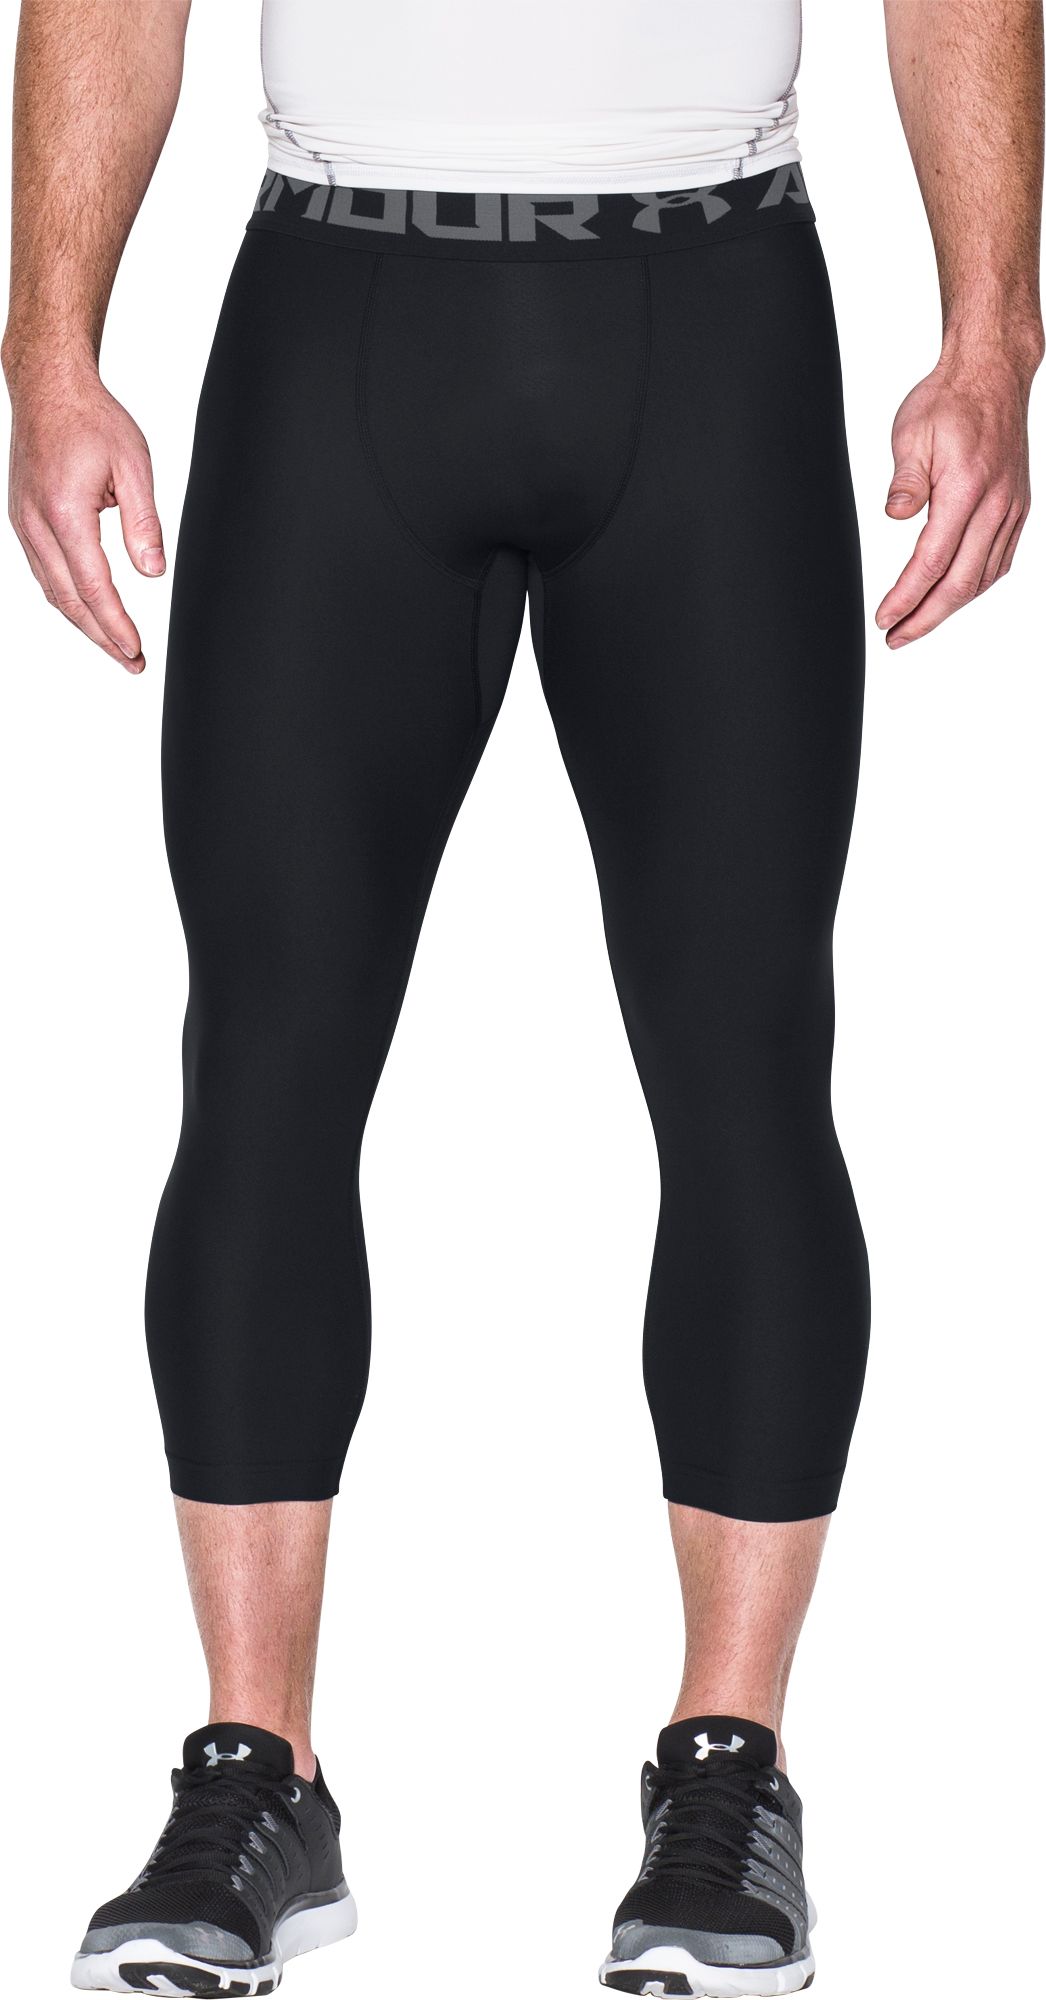 Compression Pants Tights For Men Best Price Guarantee At